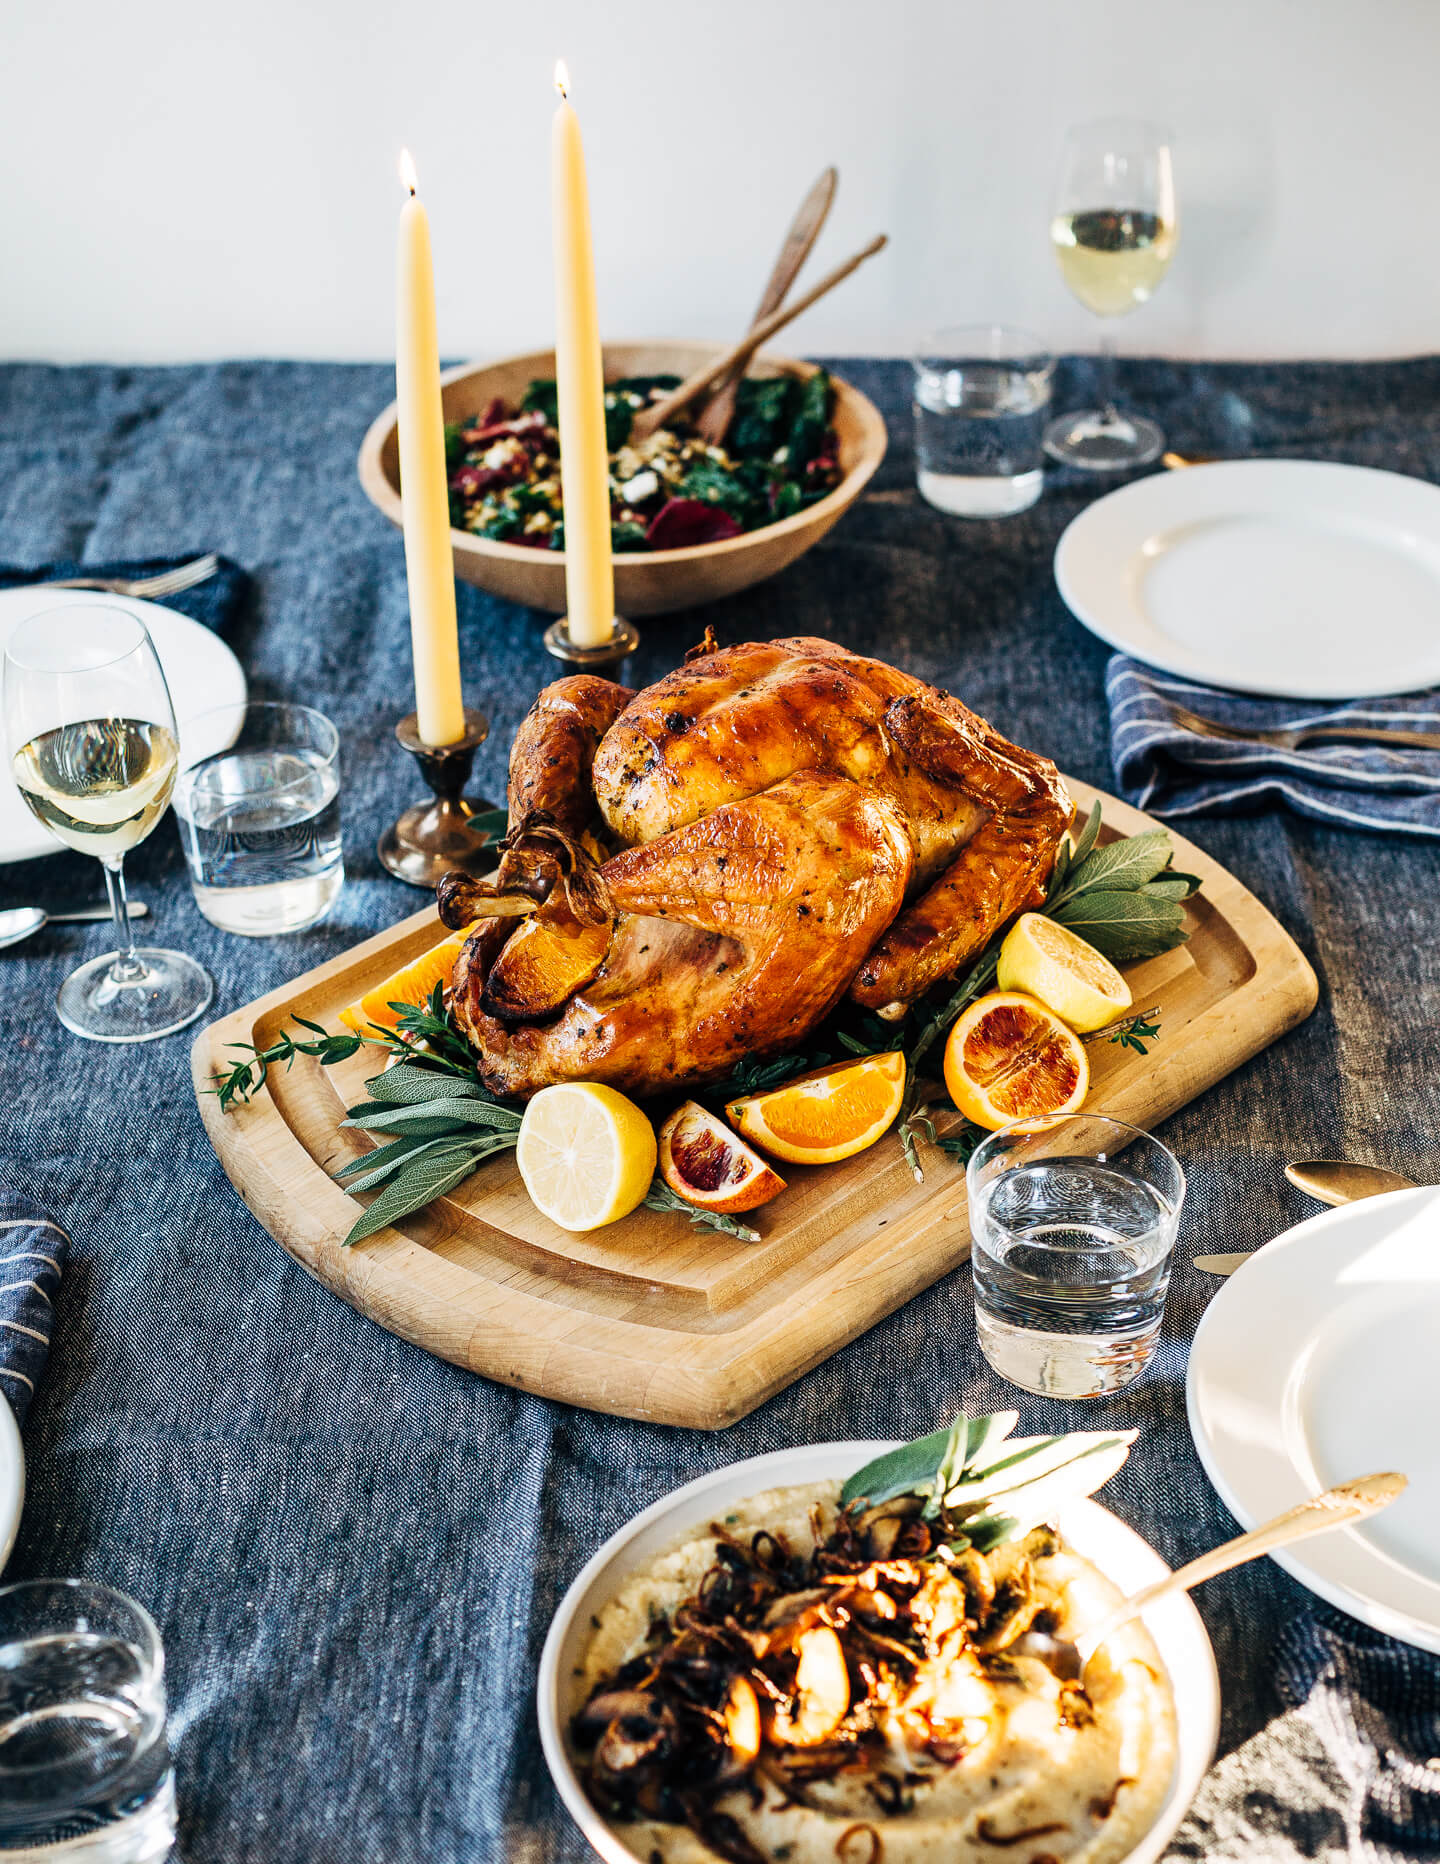 A wonderfully flavorful roasted turkey with herb butter and citrus that captures the essence of traditional Thanksgiving flavors while also keeping things interesting. Roasting a whole bird can be daunting for home cooks but with a simple approach and the right tools, it's easier than you might think!